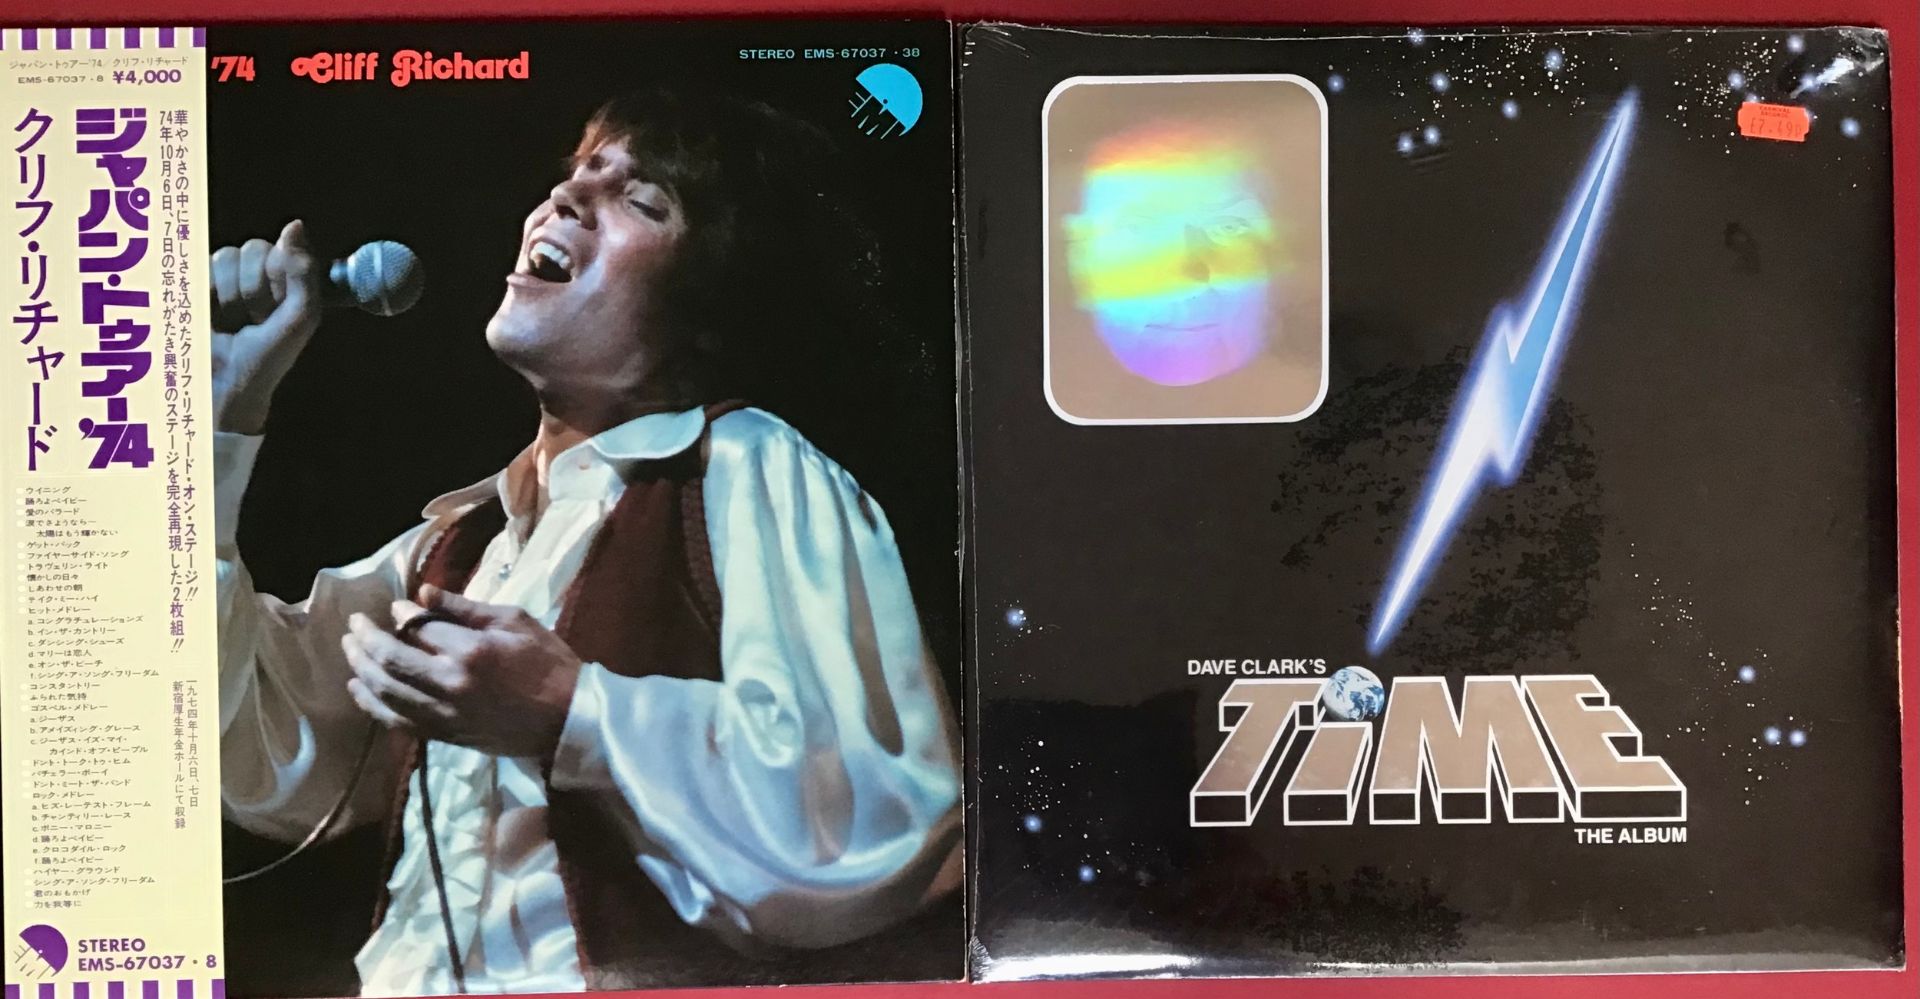 2 RARITIES FROM CLIFF RICHARD. A sealed copy of the album 'Time' with hologram and a compilation